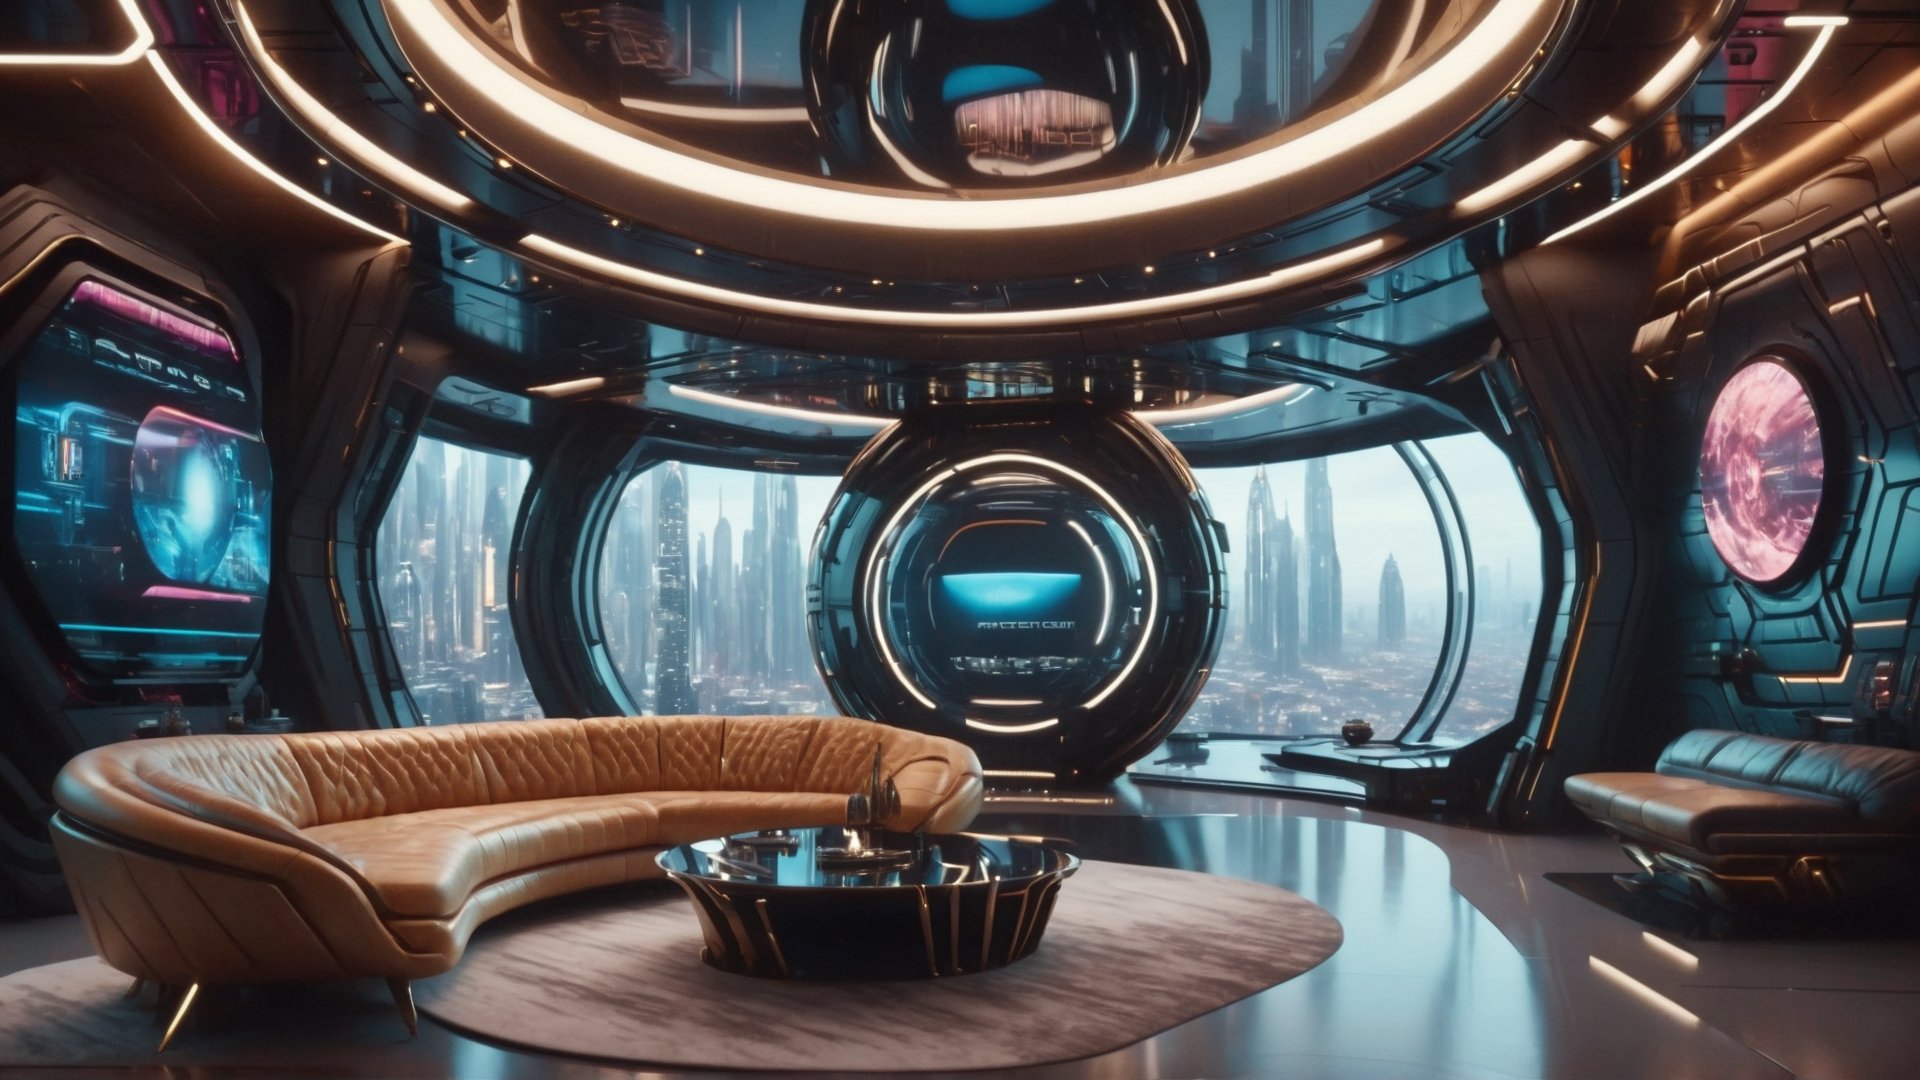 Masterpiece, ultra high definition, ultra high quality, 8k, exquisite details,
Space station, extra large floor-to-ceiling windows, future technology, intricate light, future luxury furniture, cyberpunk, outer space background, planets, galaxies,